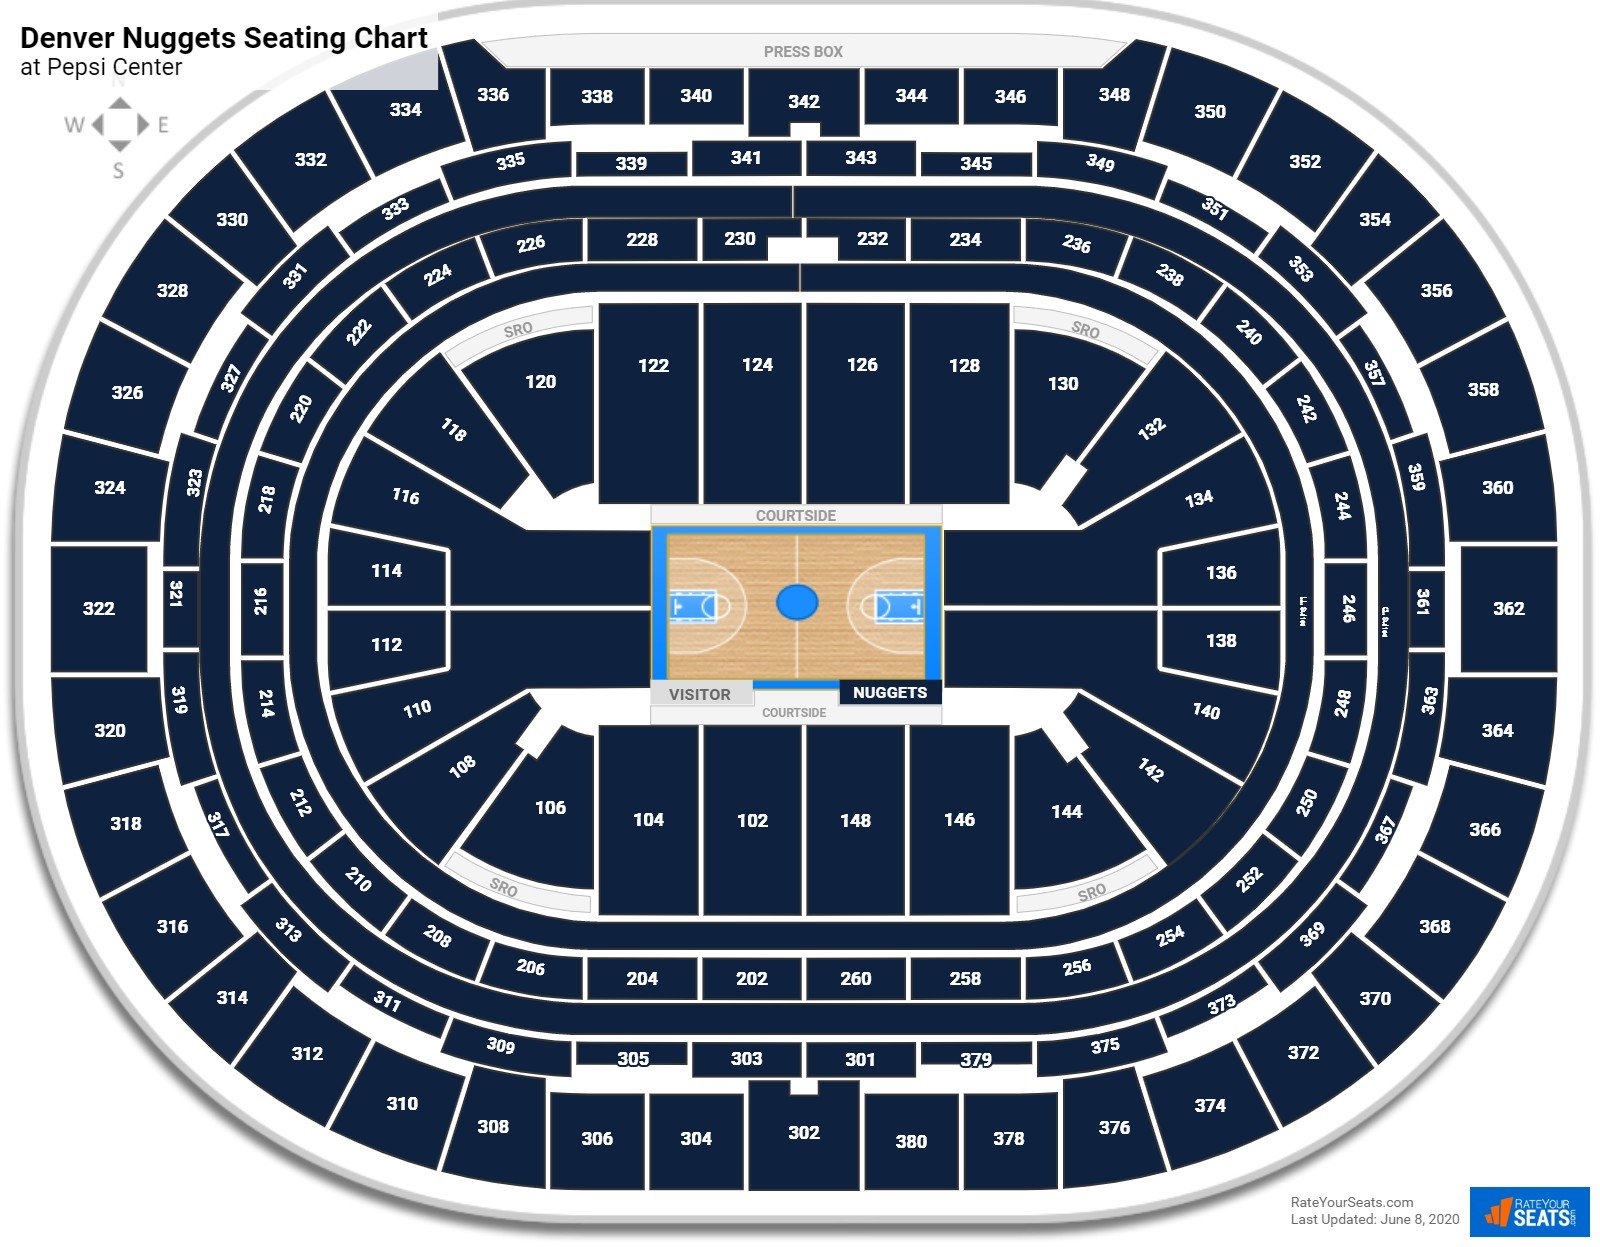 Denver Nuggets Seating Charts At Pepsi Center Rateyourseats Com.